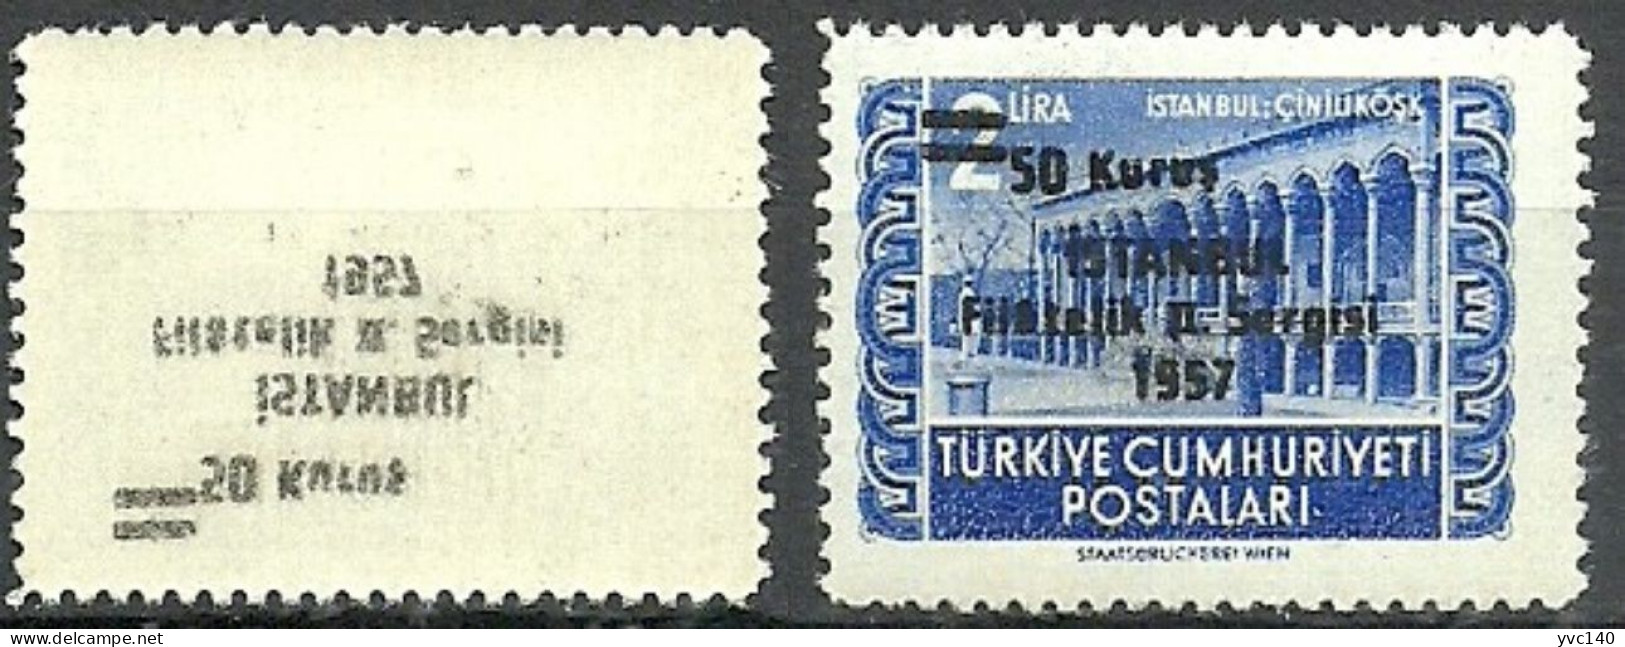 Turkey; 1957 Surcharged Commemorative Stamp For Istanbul Philately Exhibition ERROR "Abklatsch Surcharge" - Nuovi